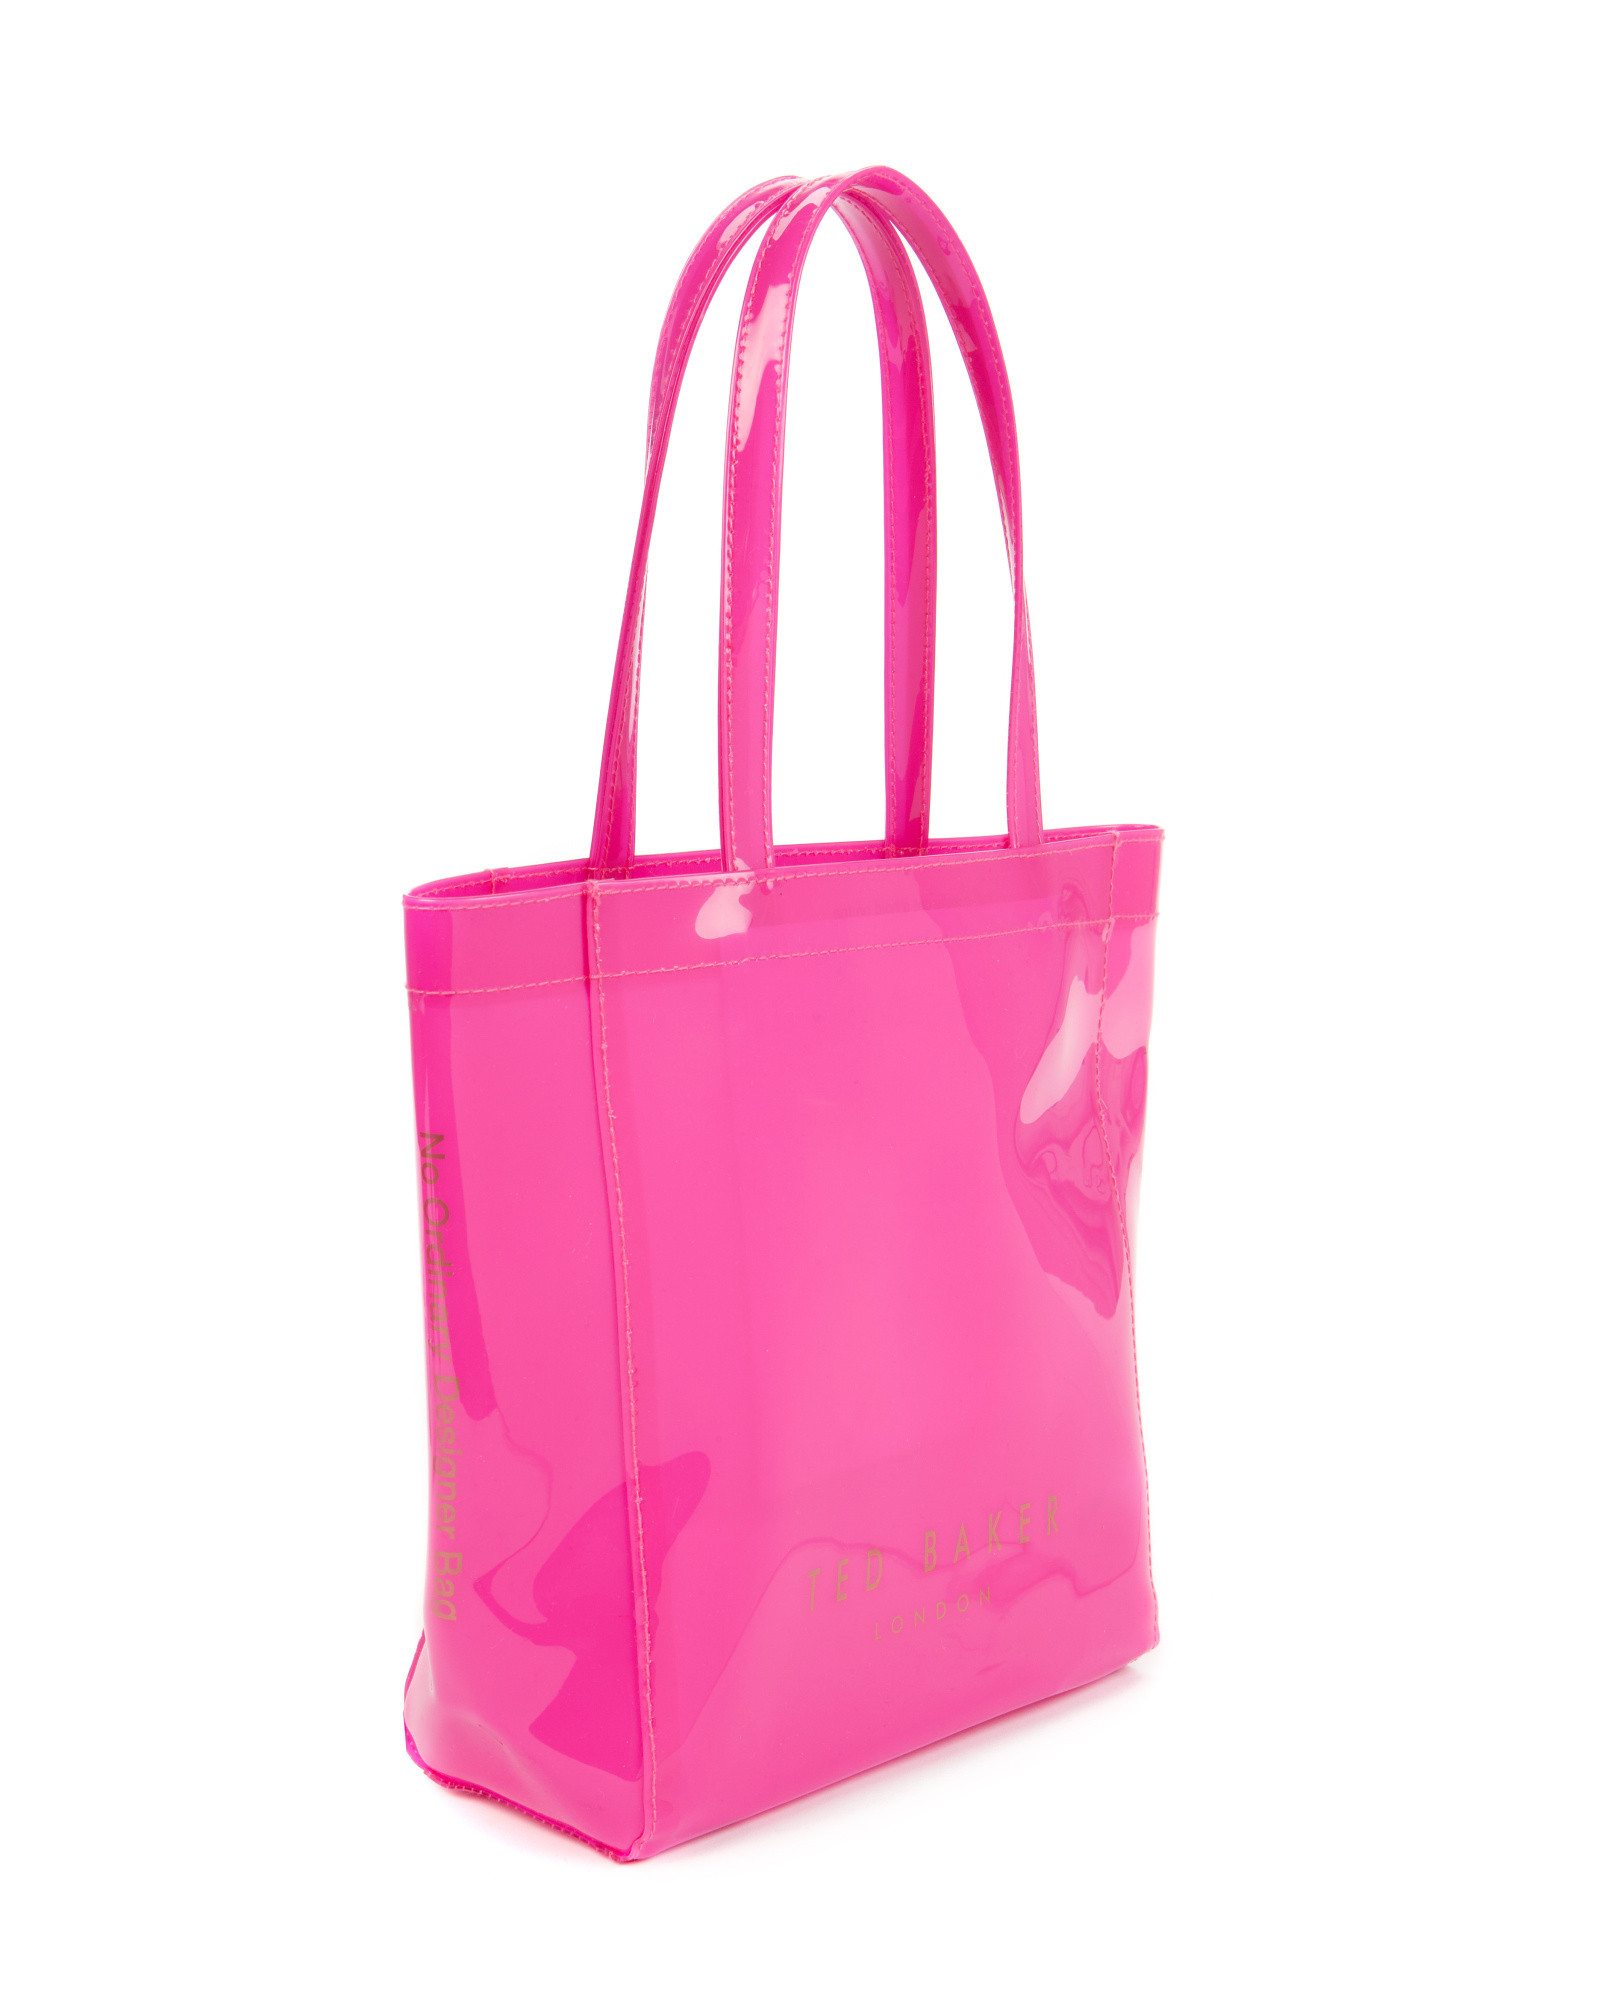 Ted Baker Small Bow Shopper Bag in Pink - Lyst